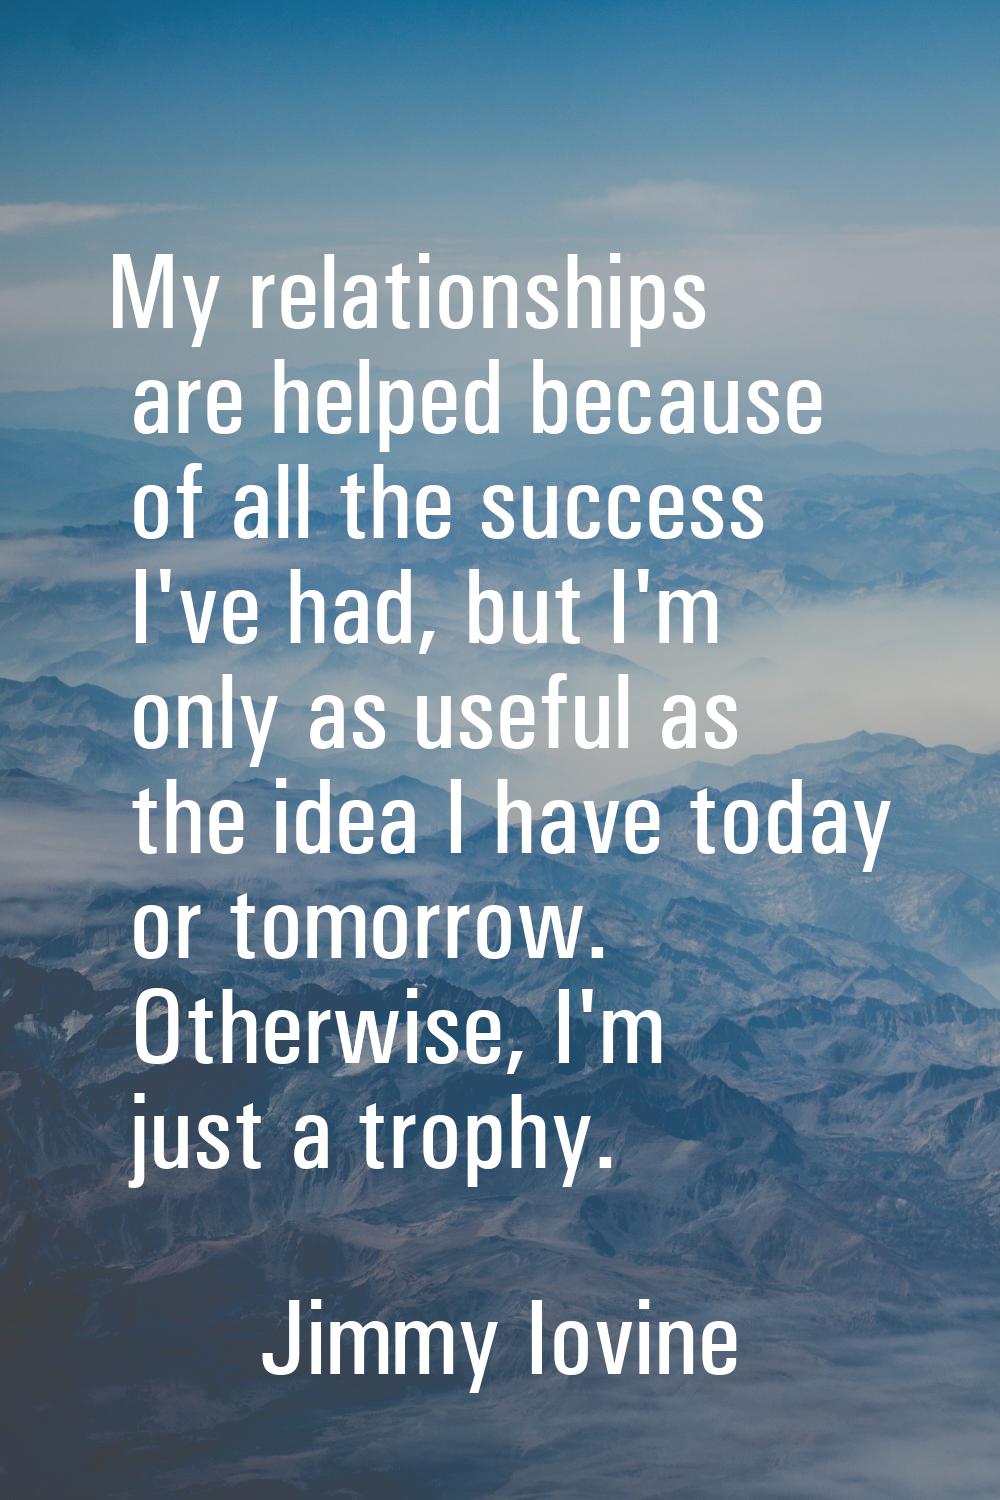 My relationships are helped because of all the success I've had, but I'm only as useful as the idea